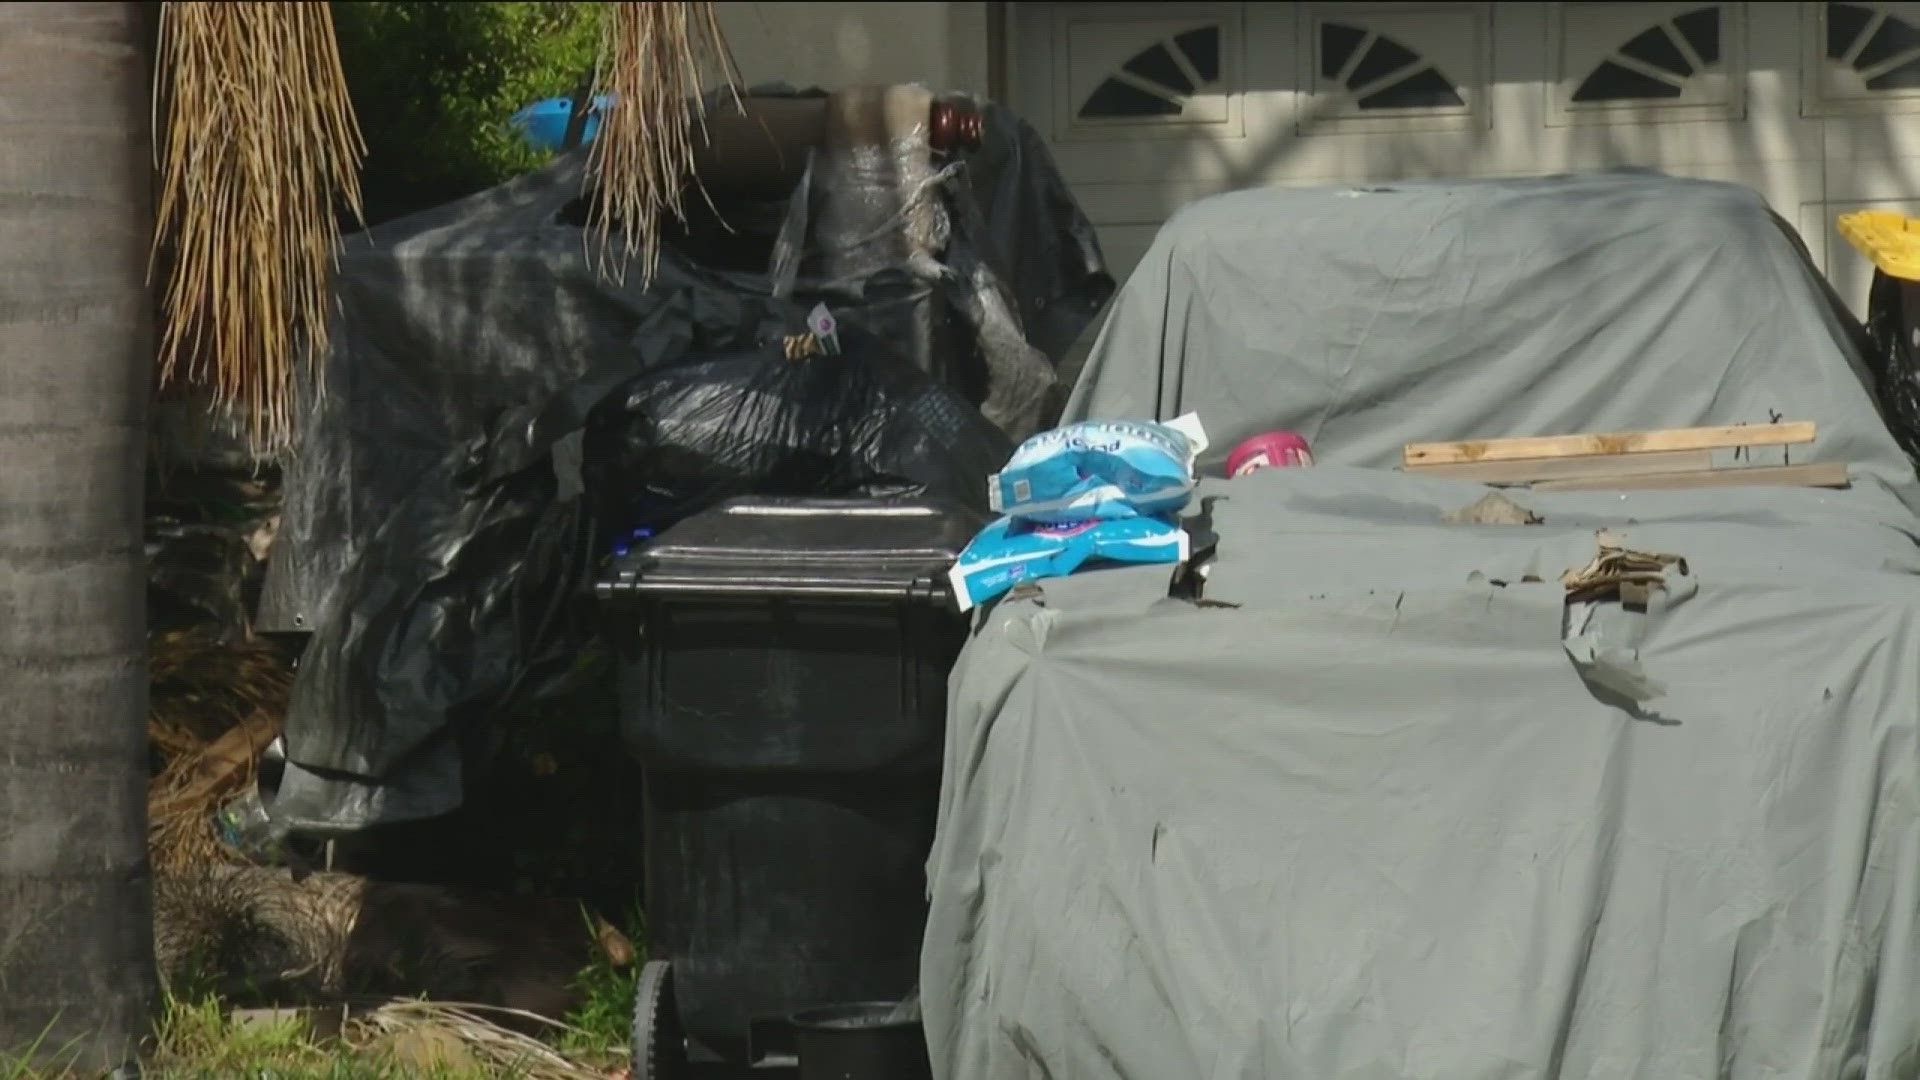 Boxes of trash and furniture can be seen outside the home on Mariner Drive. A neighbor said there is rotting food that attracts rats.